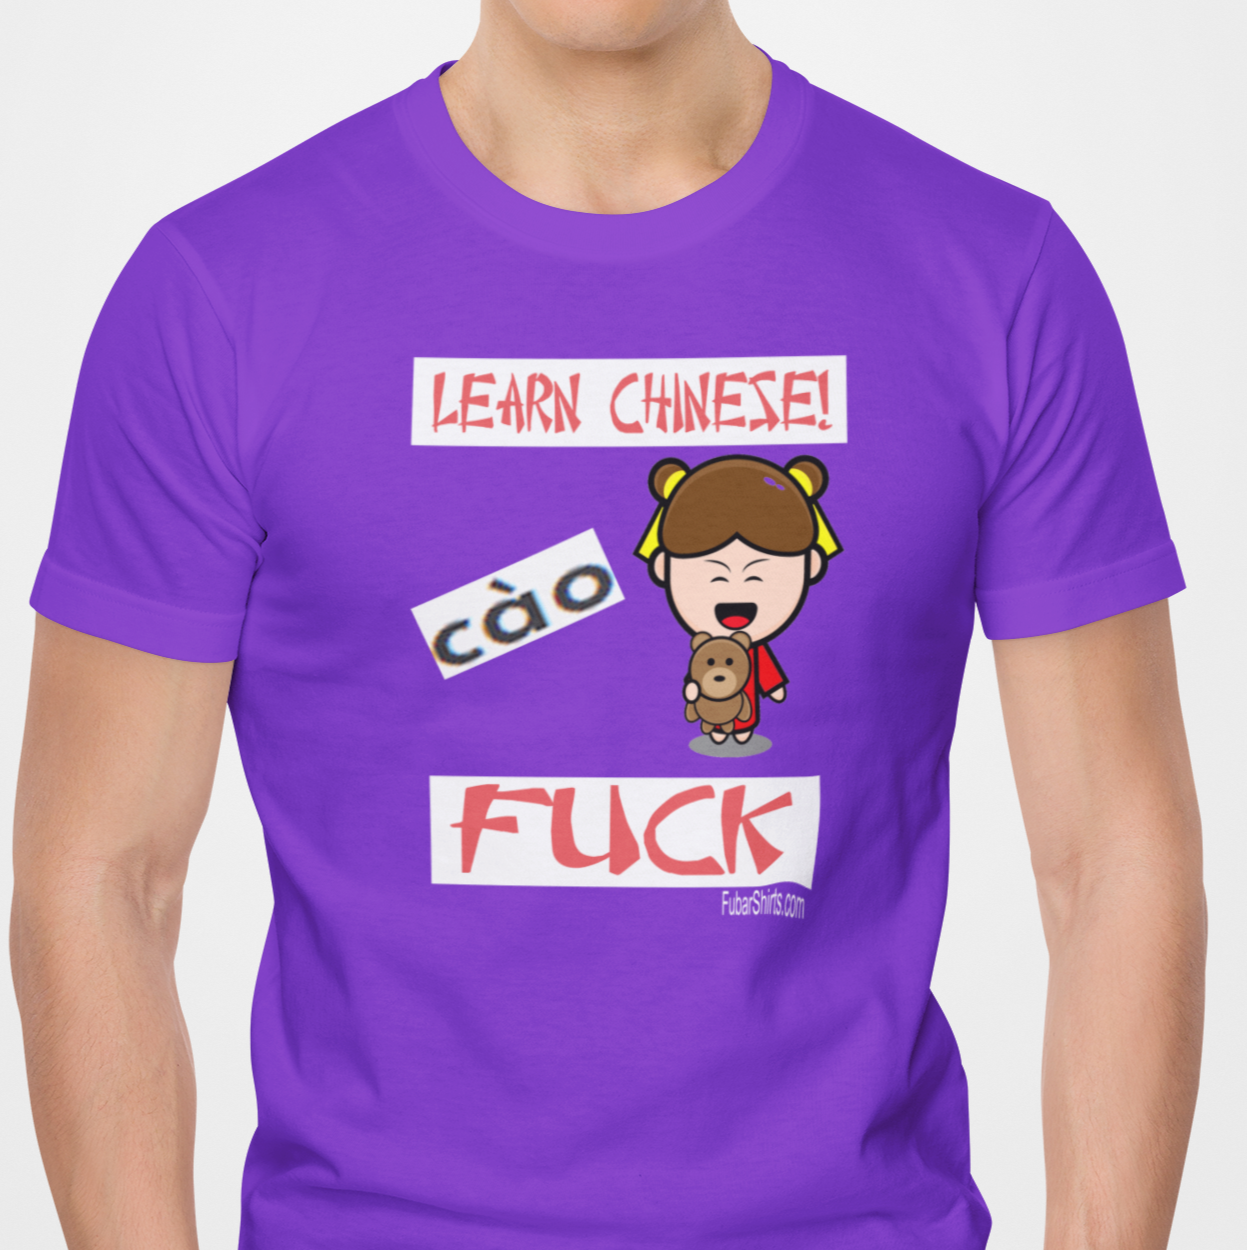 Say Fuck in Chinese t-shirt. Purple tee by Fubarshirts.comJ